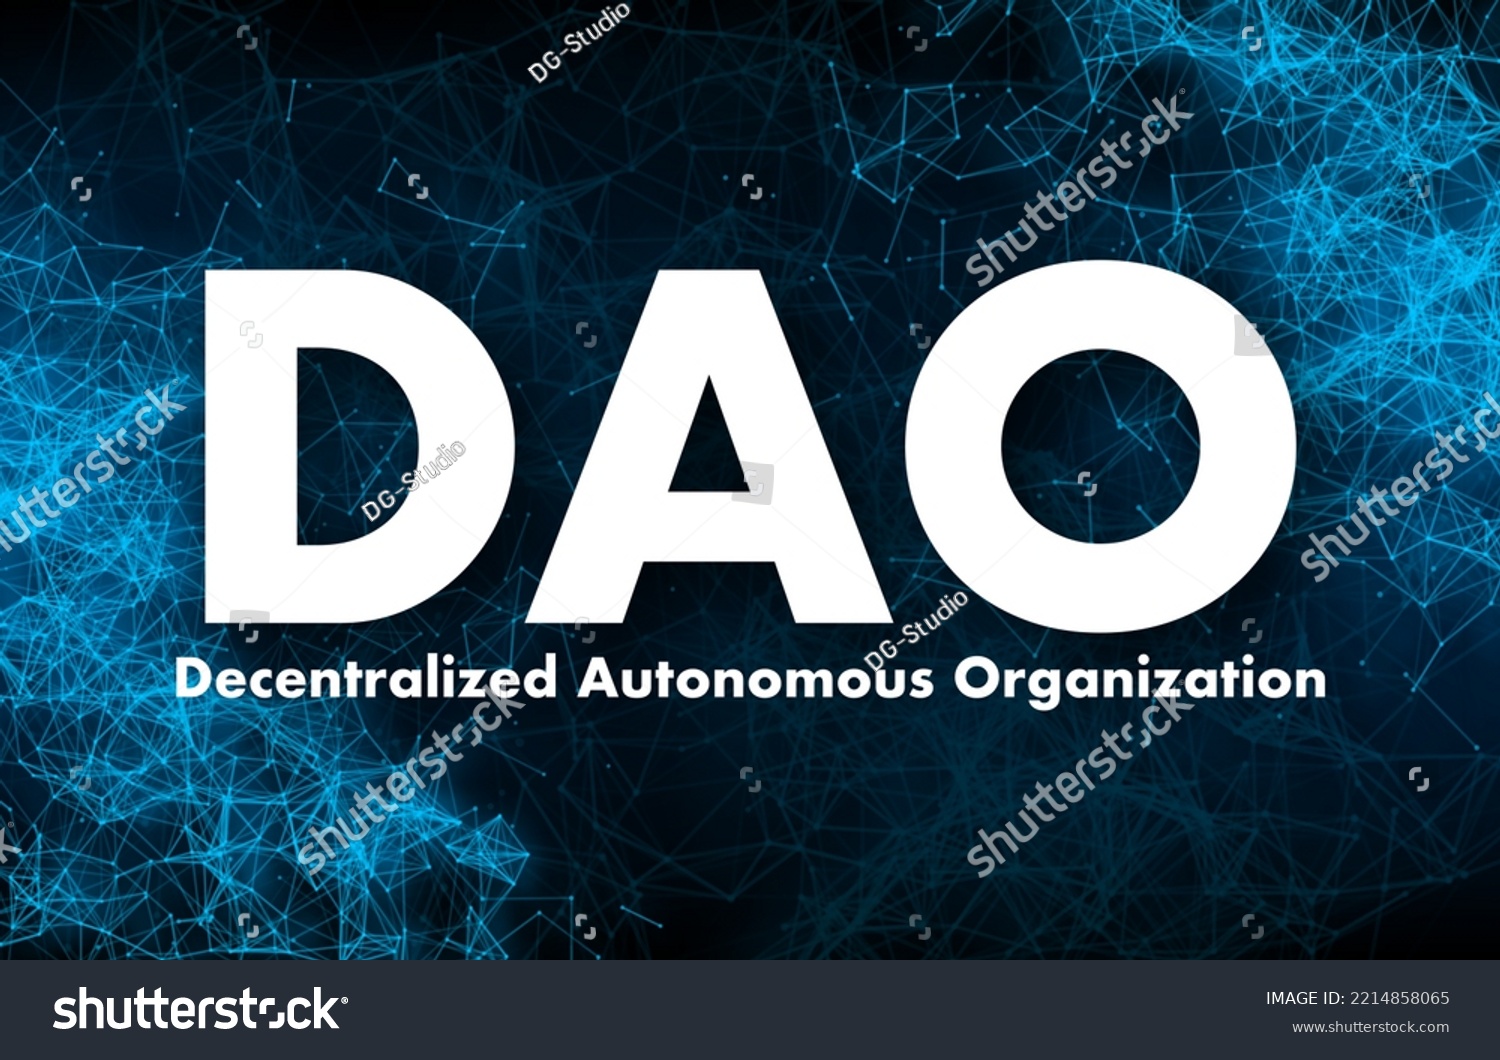 SVG of DAO, Decentralized Autonomous Organization, leadership by code and blockchain. Vector stock illustration. svg